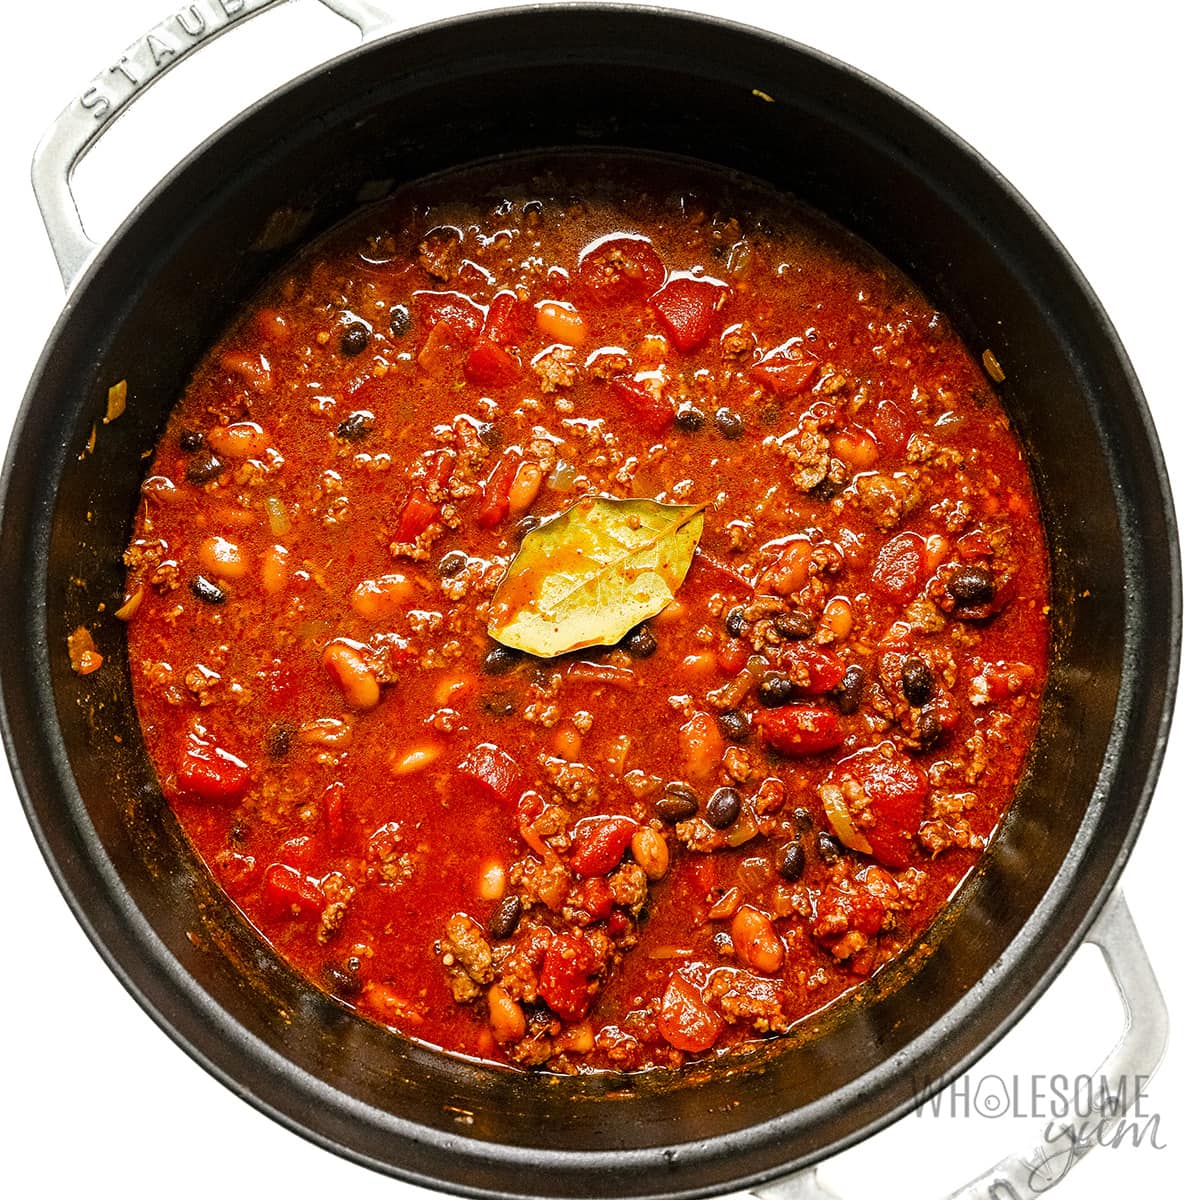 Chili recipe simmering on stovetop. 